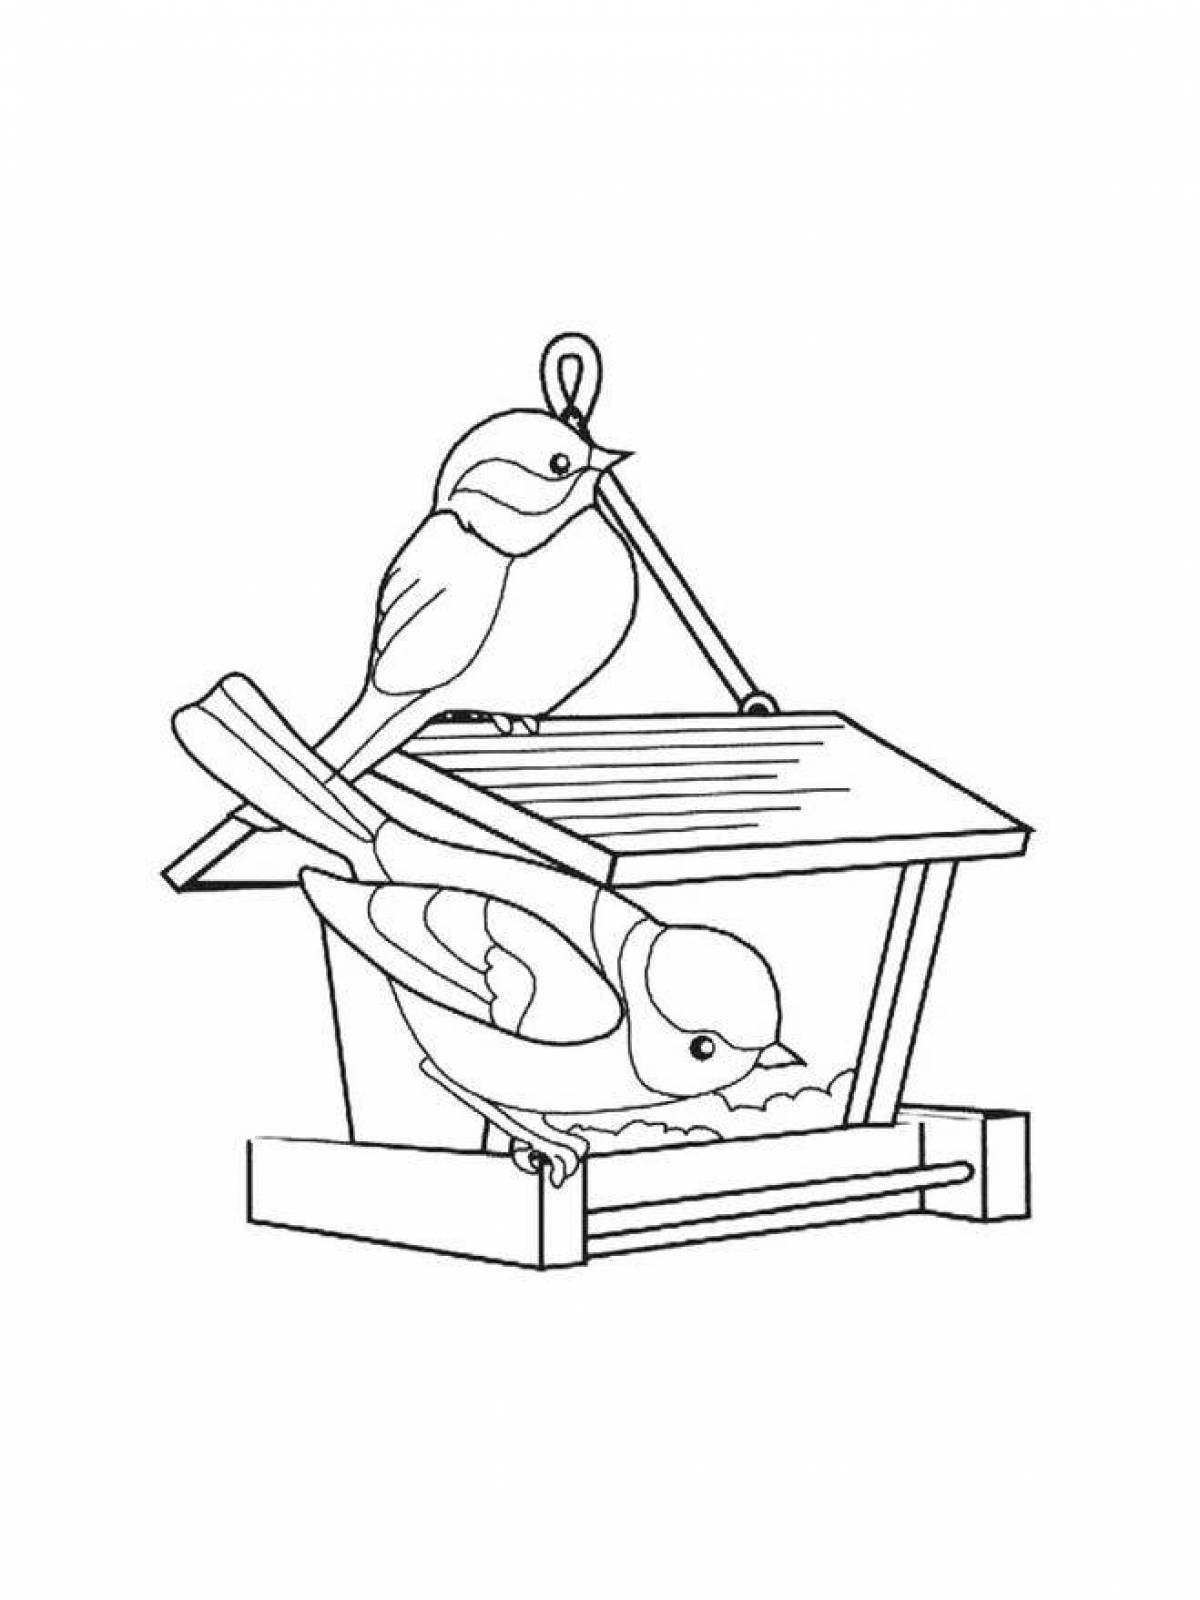 Cute bird feeder coloring page for kids